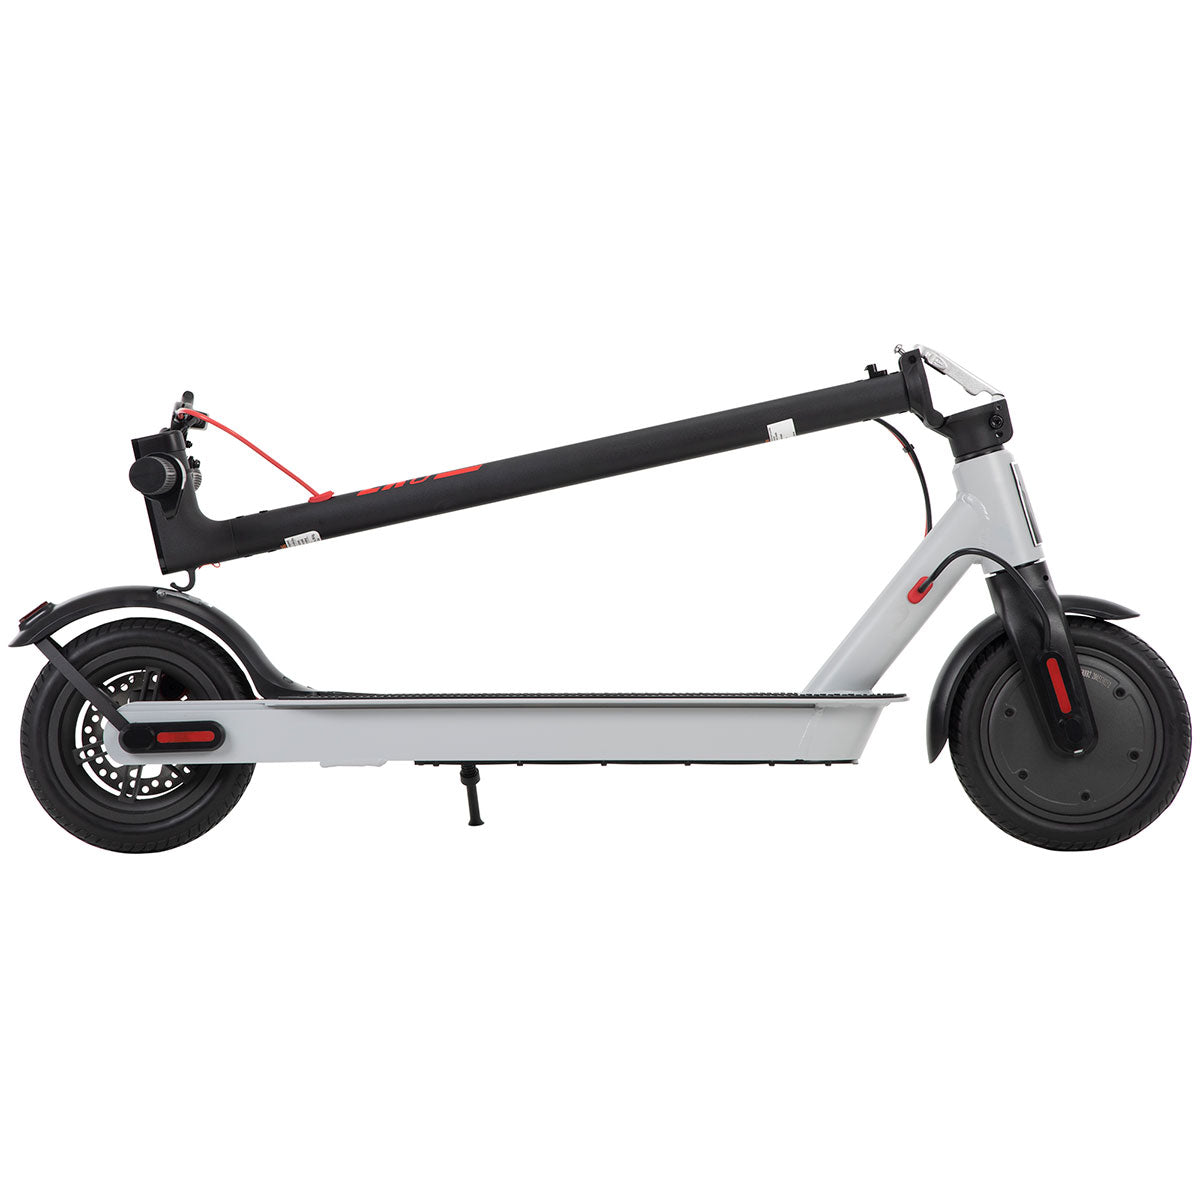 Scooter eléctrico Huffy ZX3 Lithium Color Gris Con Asiento Desmontable